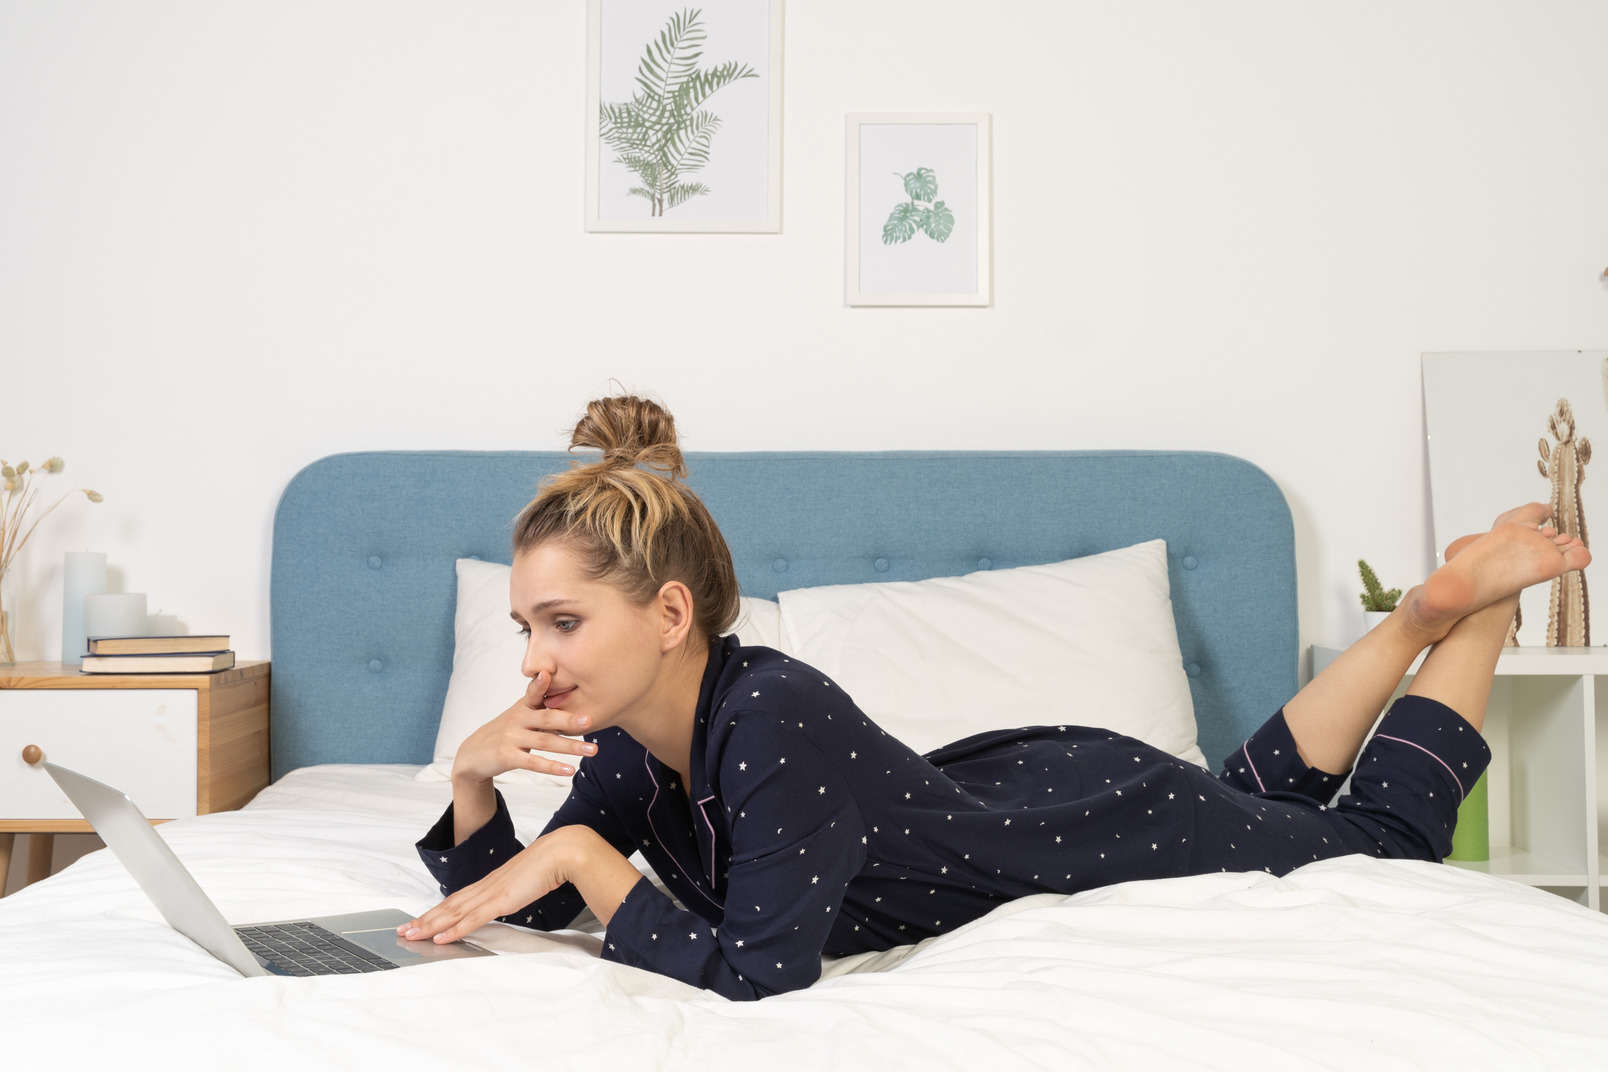 Side view of a young female laying in bed with her laptop